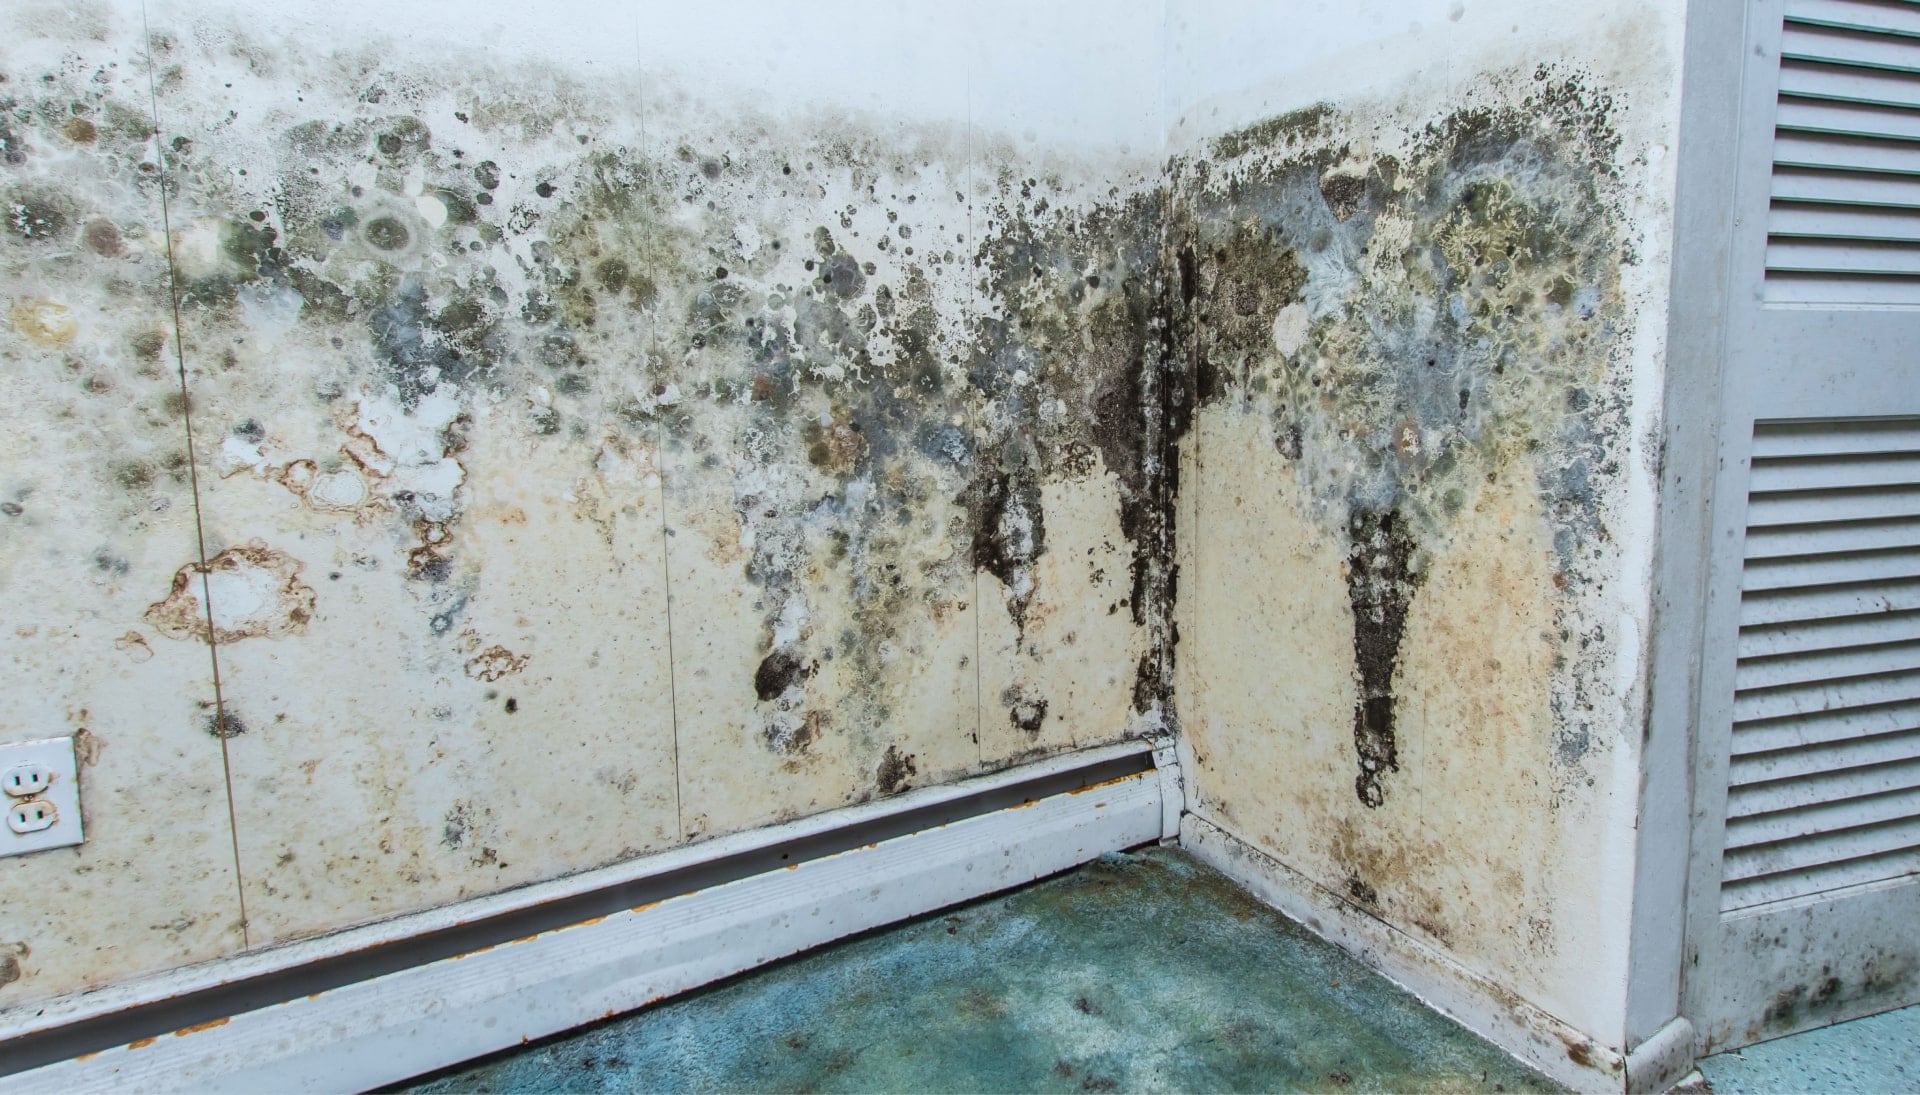 Mold-Damager-Odor-Control in Gainesville